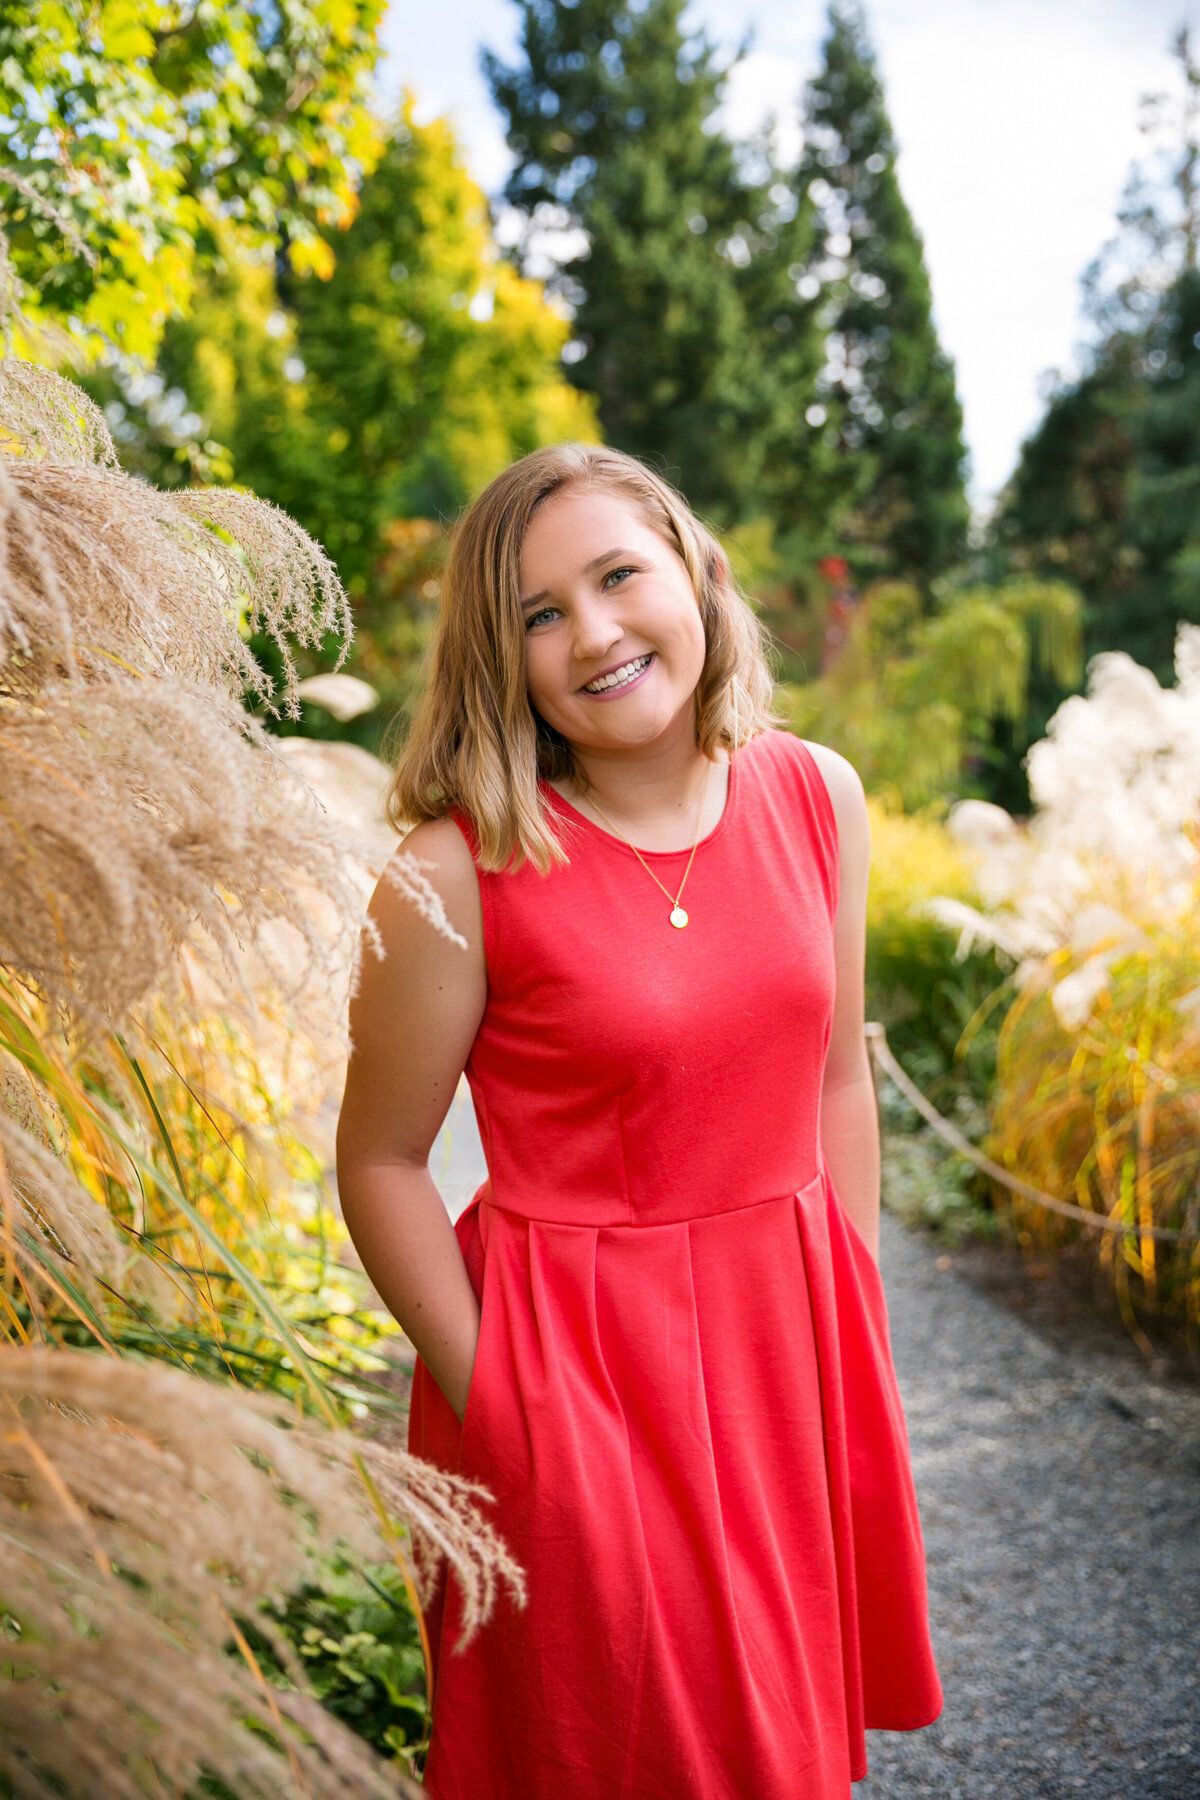 issaquah-bellevue-seattle-senior-girls-teens-pictures-nancy-chabot-photography-190